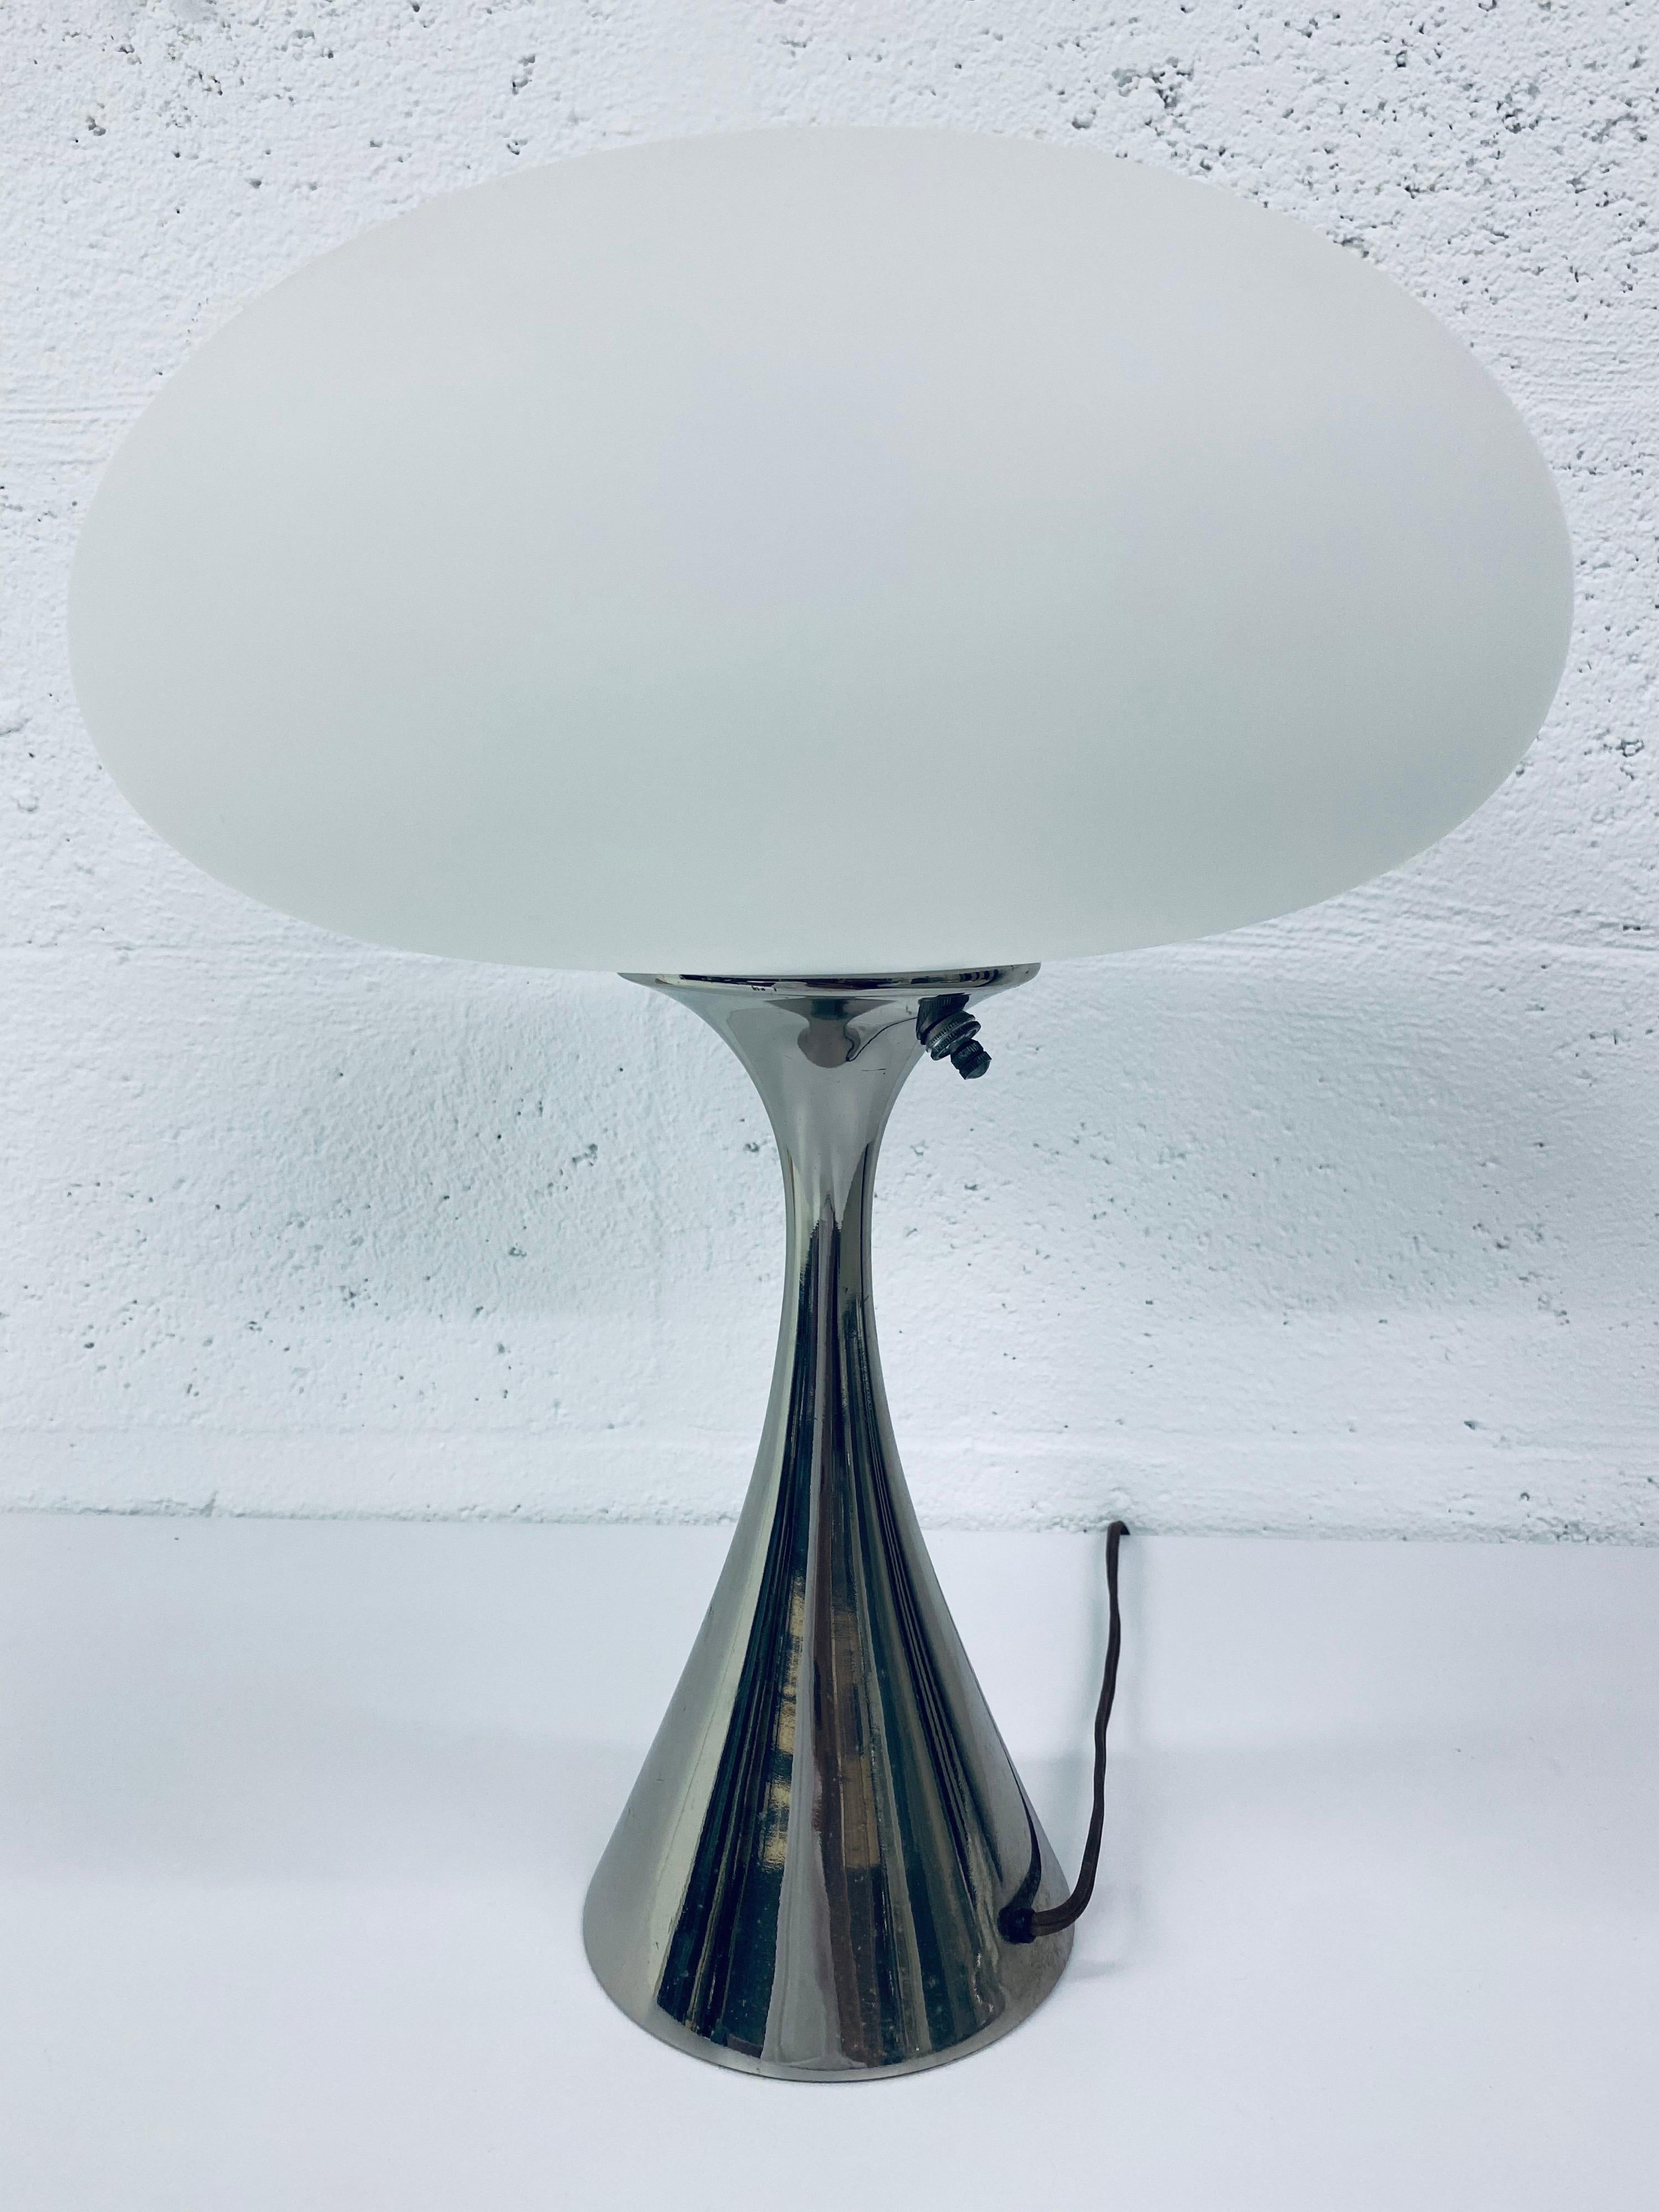 American Bill Curry Polished Chrome Mushroom Table or Desk Lamp for Laurel